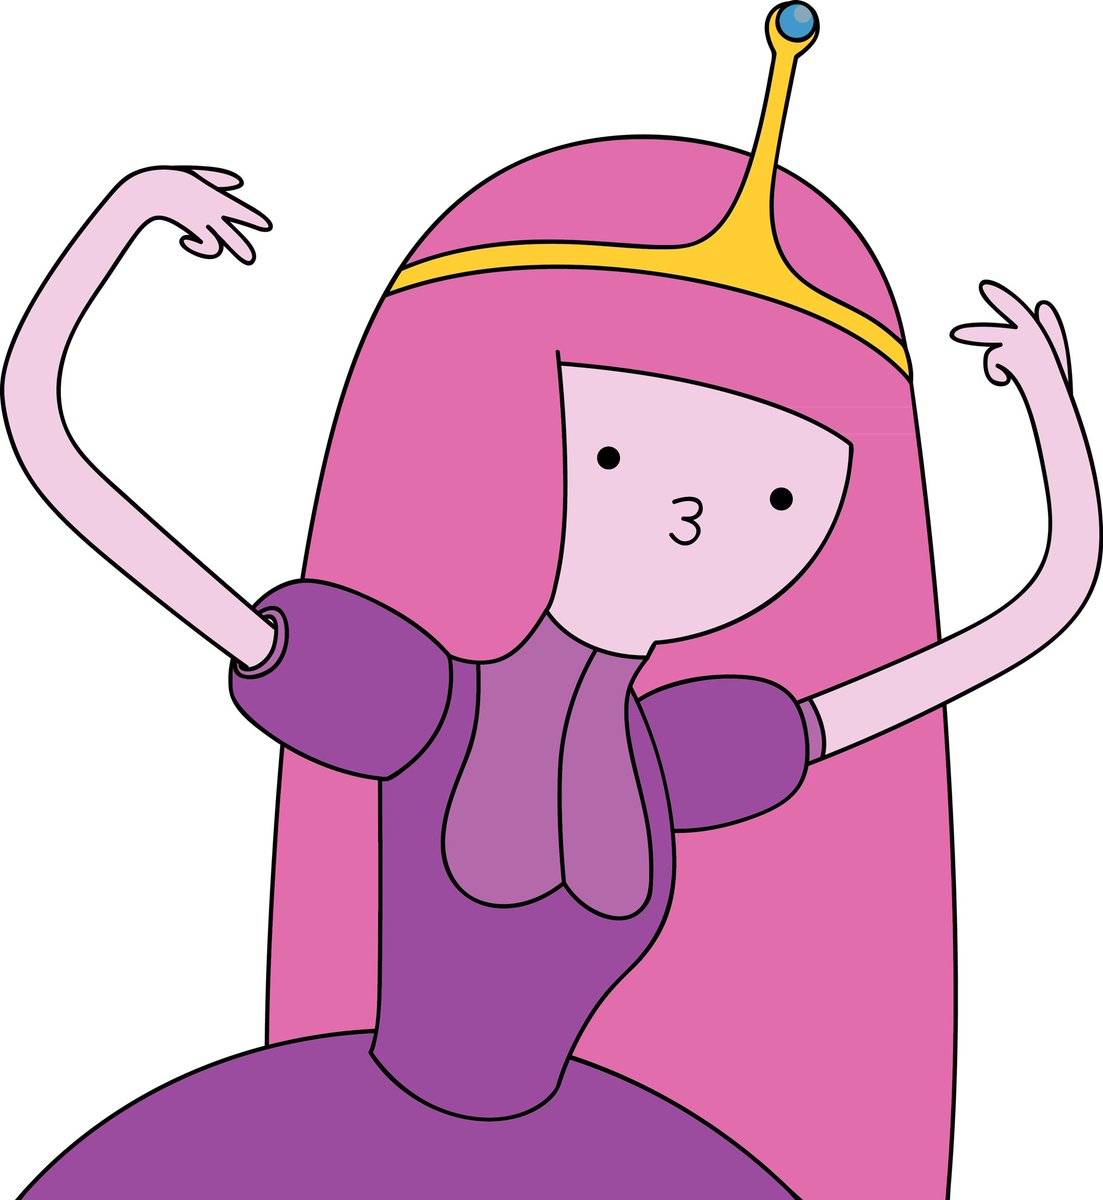 princess bubblegum, in a relationship with marceline